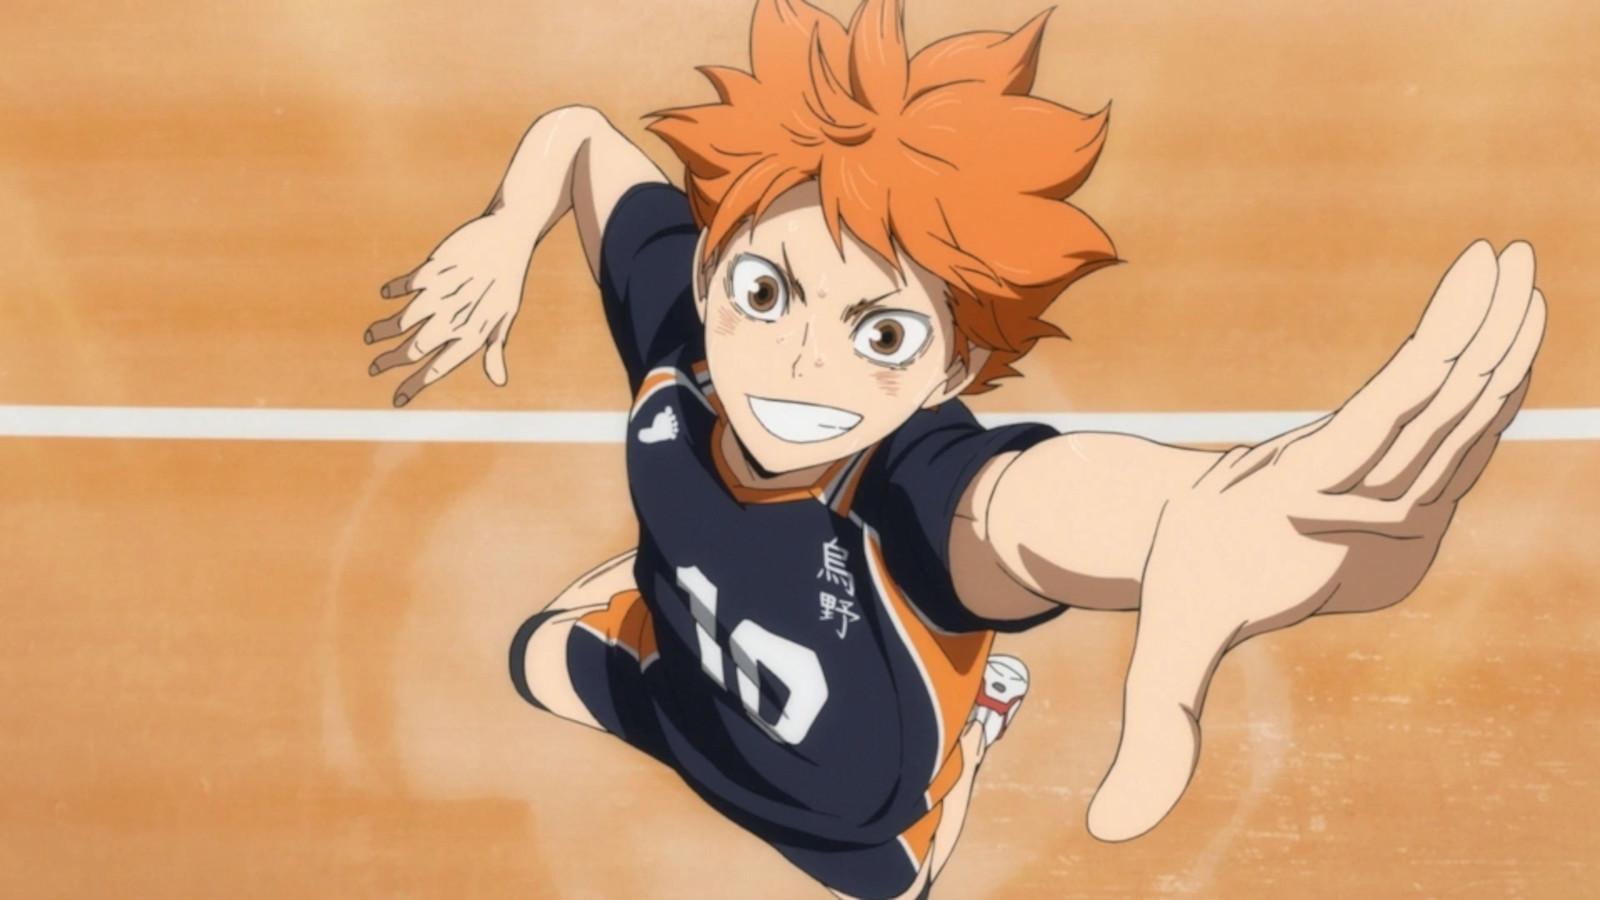 Haikyuu!! The Dumpster Battle review